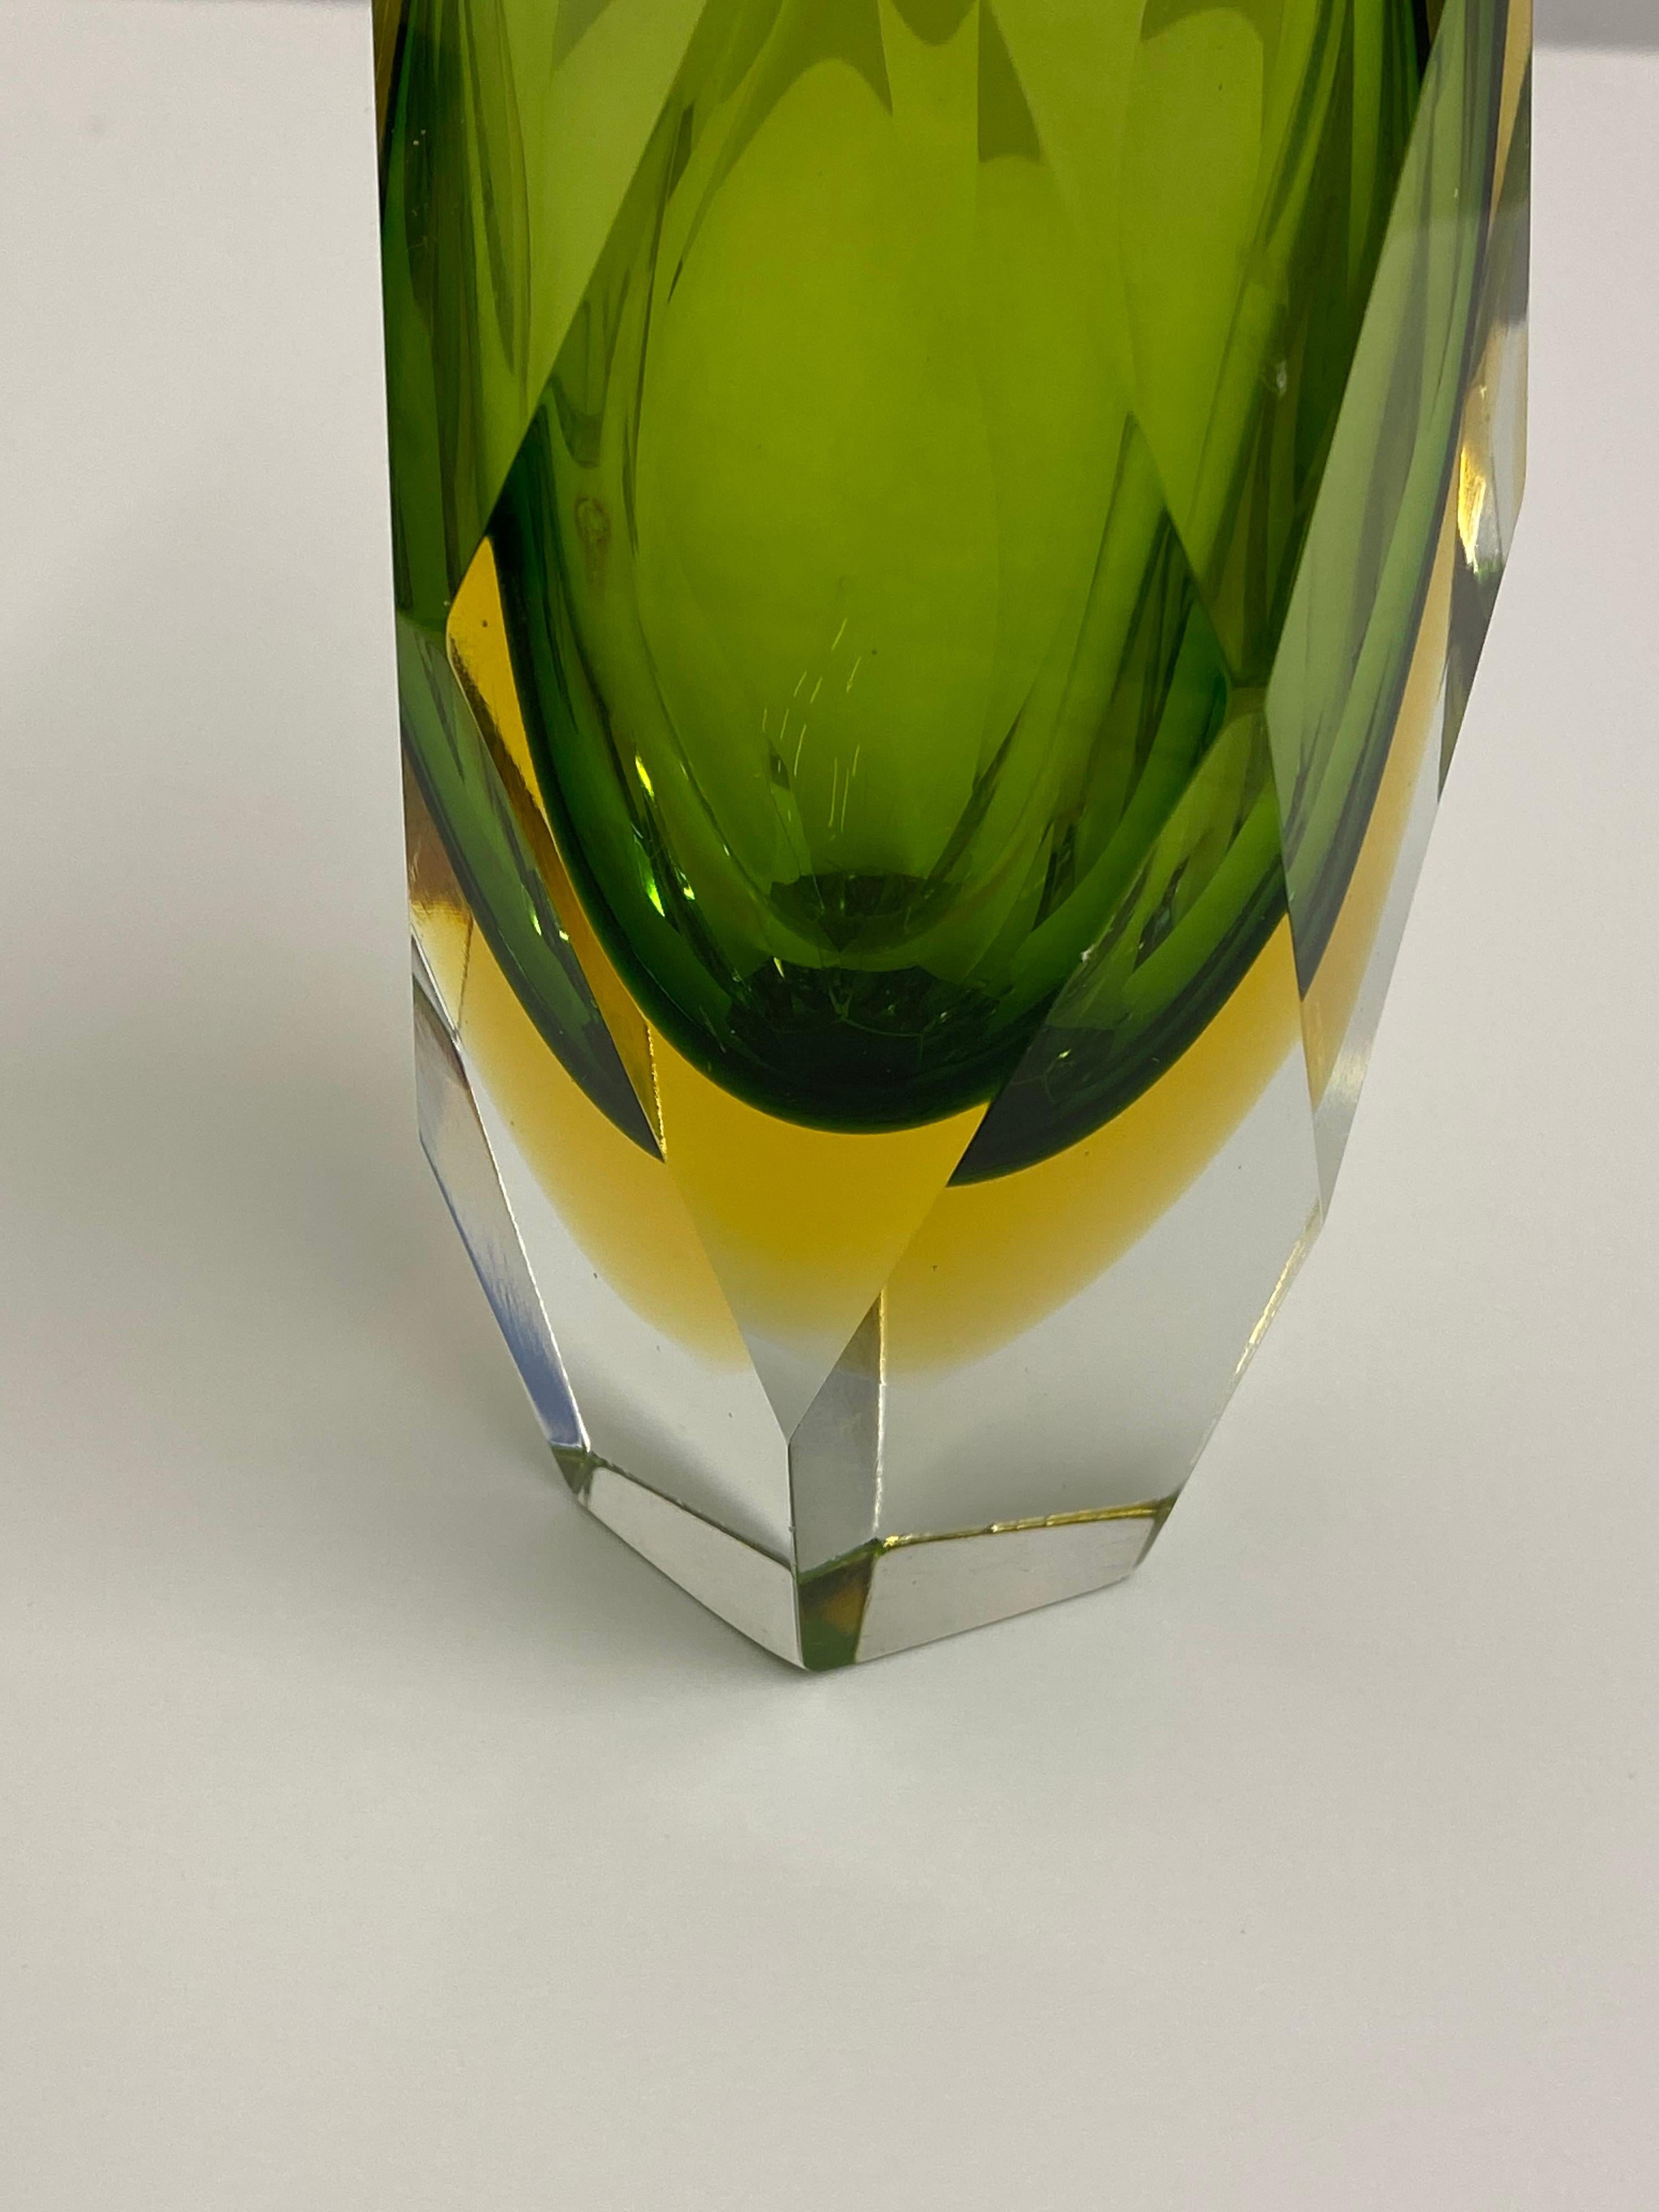 Alessandro Mandruzzato faceted vase in clear yellow and green. Beautifully layered and ground down to perfection! The yellow compliments the green perfectly! Nice size measuring: 7.5 tall and 3.25 across!